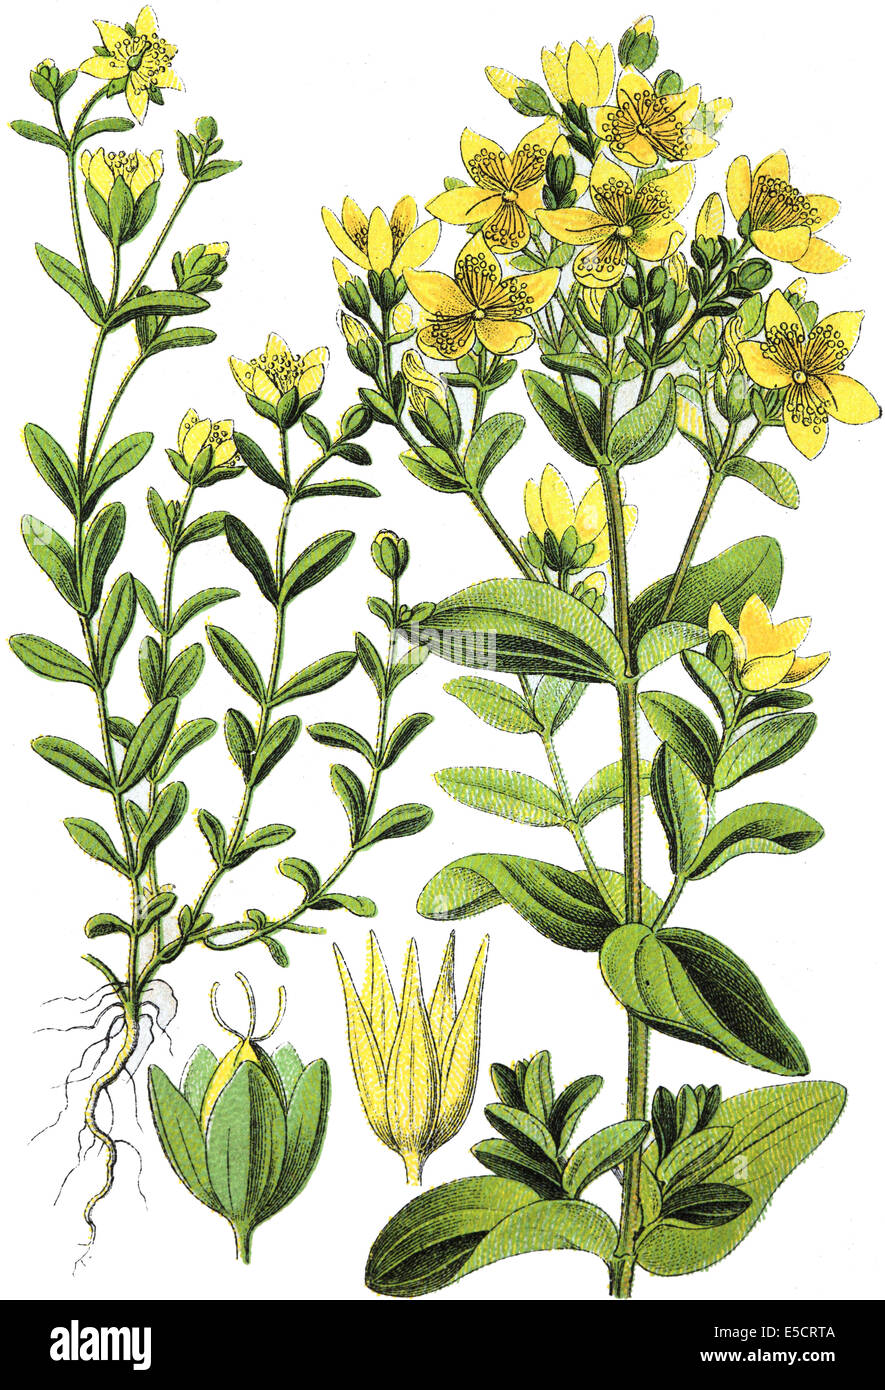 Hypericum humifusum is a prostrate flowering plant in the genus Hypericum commonly known as trailing St John's wort Stock Photo